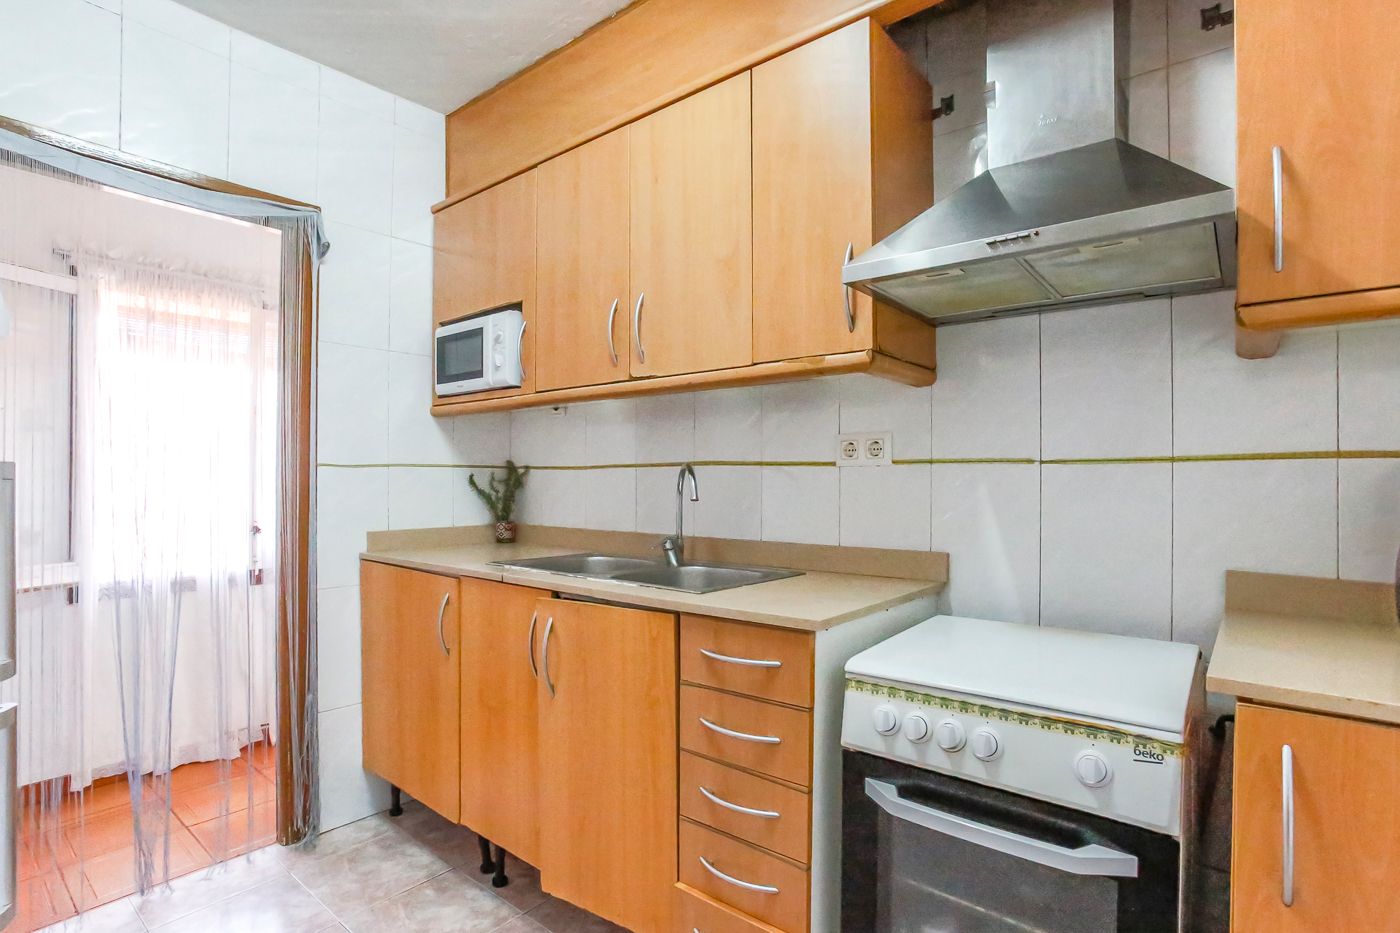 Duplex with terrace for sale in Gualta with division made into 2 homes